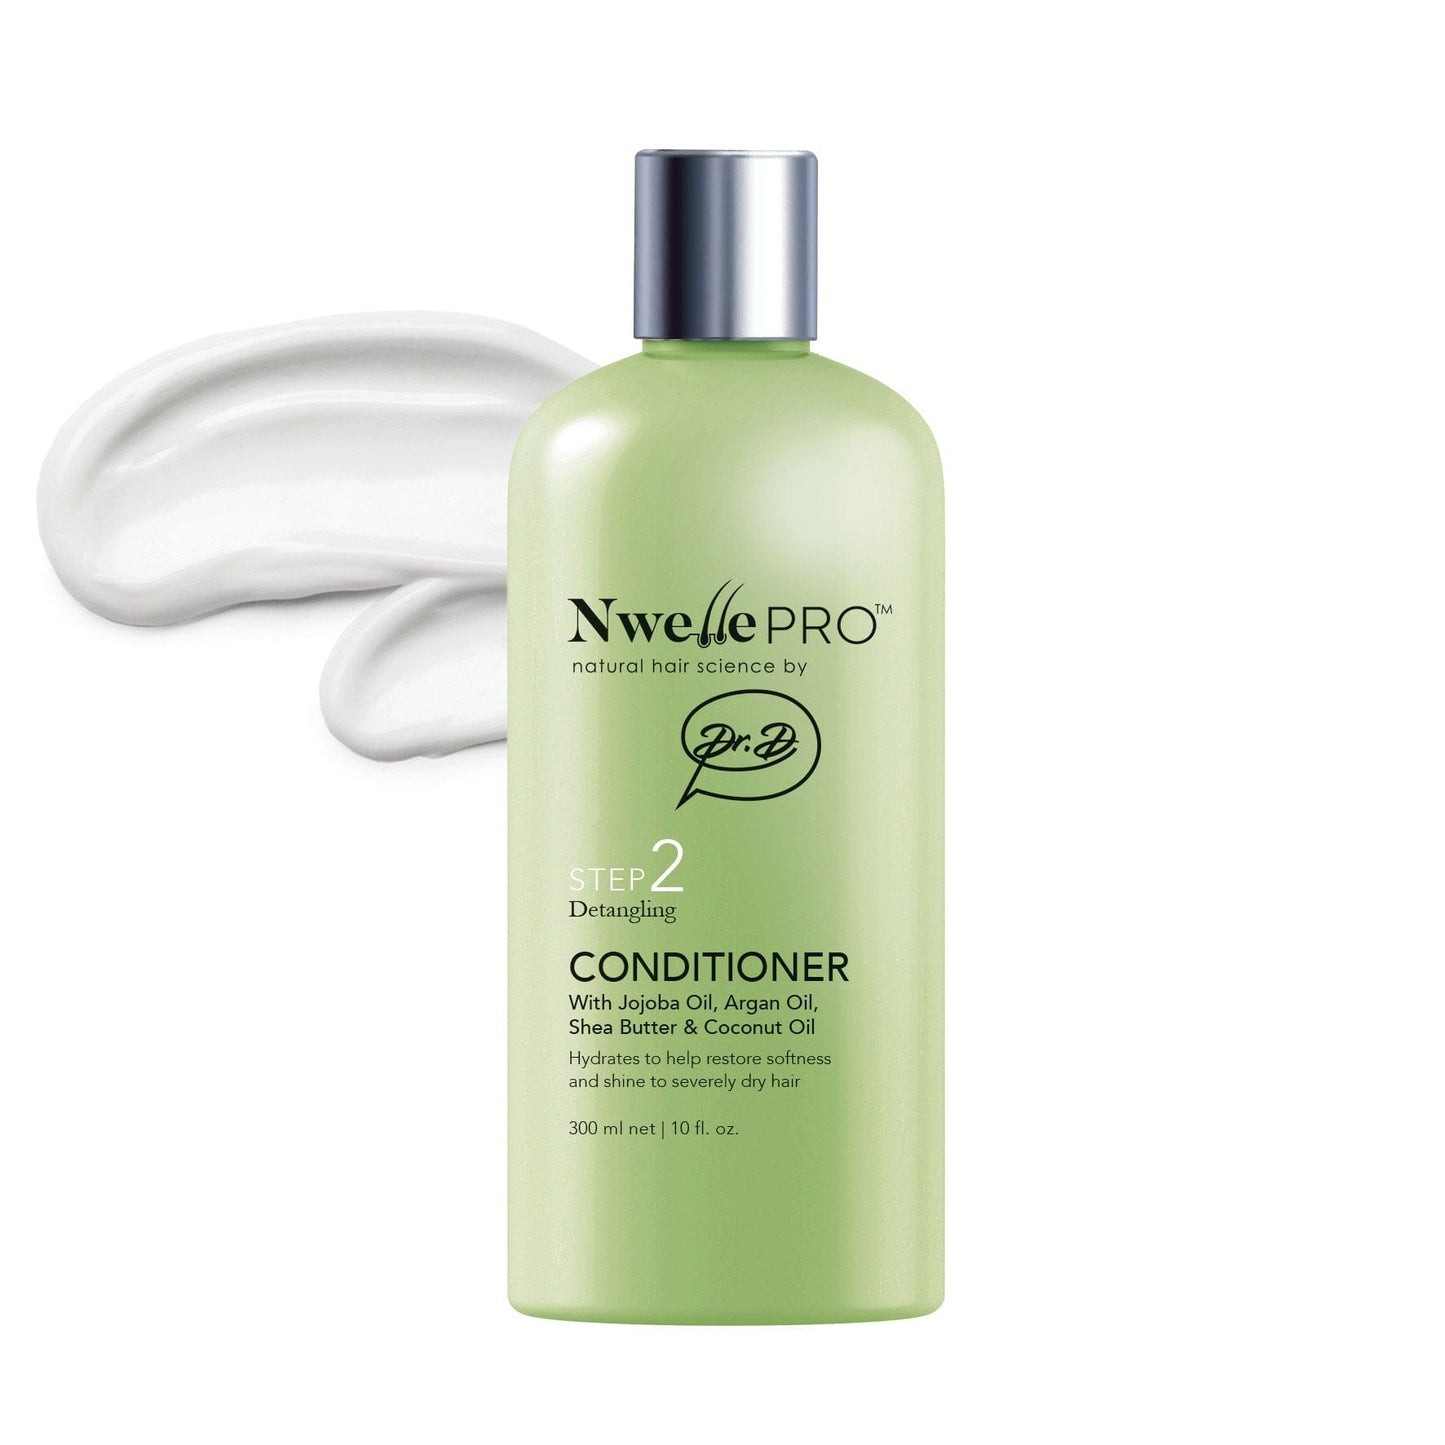 Nwelle Detangling Conditioner Deeply hydrates to restore softness and shine to severely dry hair. - Naturesnaturalhair.com